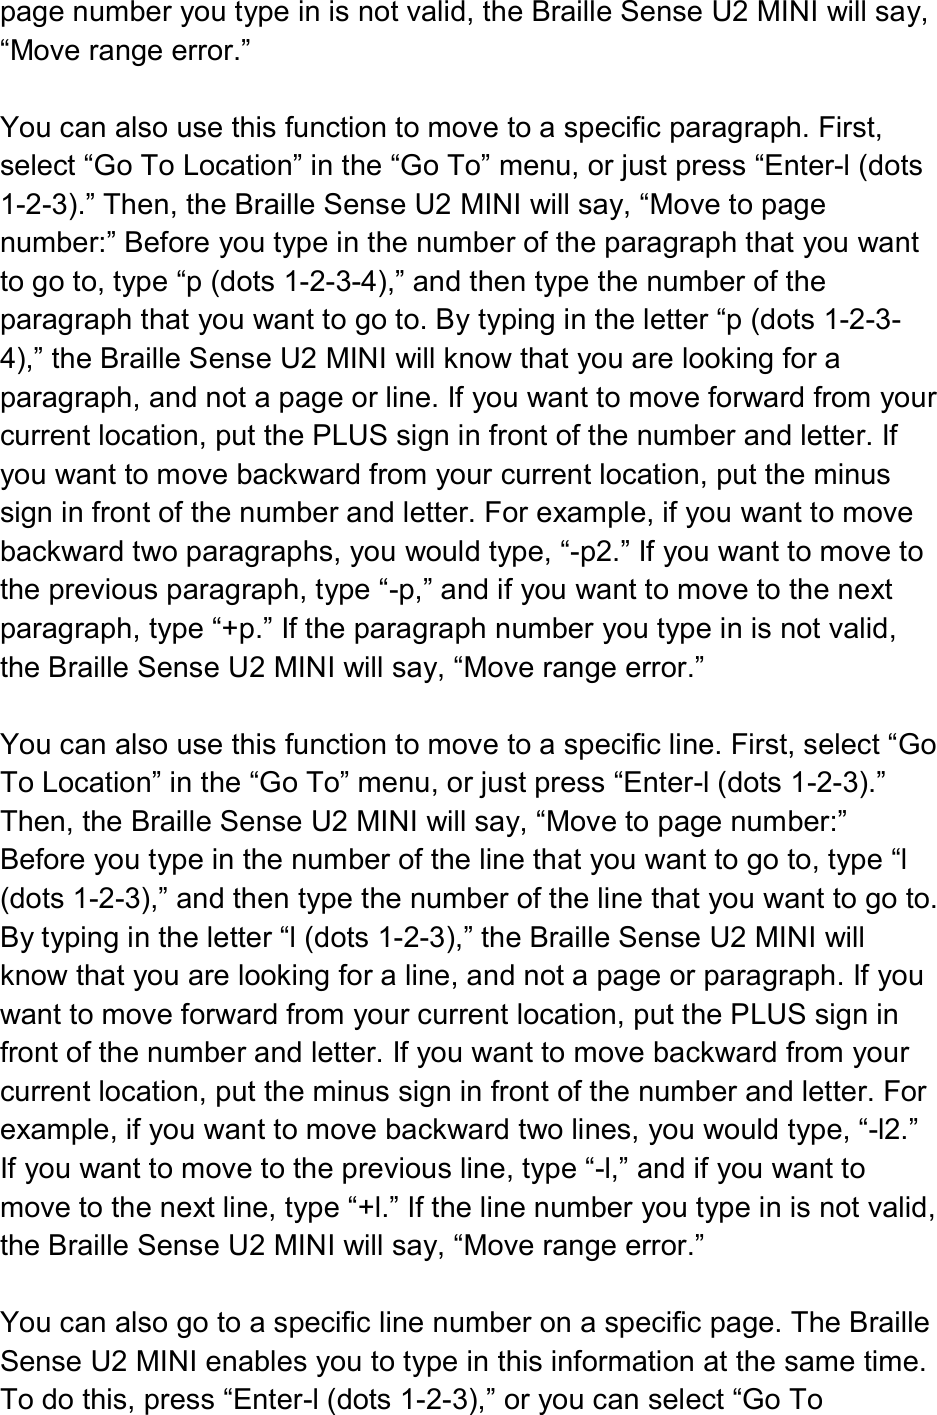  page number you type in is not valid, the Braille Sense U2 MINI will say, “Move range error.”  You can also use this function to move to a specific paragraph. First, select “Go To Location” in the “Go To” menu, or just press “Enter-l (dots 1-2-3).” Then, the Braille Sense U2 MINI will say, “Move to page number:” Before you type in the number of the paragraph that you want to go to, type “p (dots 1-2-3-4),” and then type the number of the paragraph that you want to go to. By typing in the letter “p (dots 1-2-3-4),” the Braille Sense U2 MINI will know that you are looking for a paragraph, and not a page or line. If you want to move forward from your current location, put the PLUS sign in front of the number and letter. If you want to move backward from your current location, put the minus sign in front of the number and letter. For example, if you want to move backward two paragraphs, you would type, “-p2.” If you want to move to the previous paragraph, type “-p,” and if you want to move to the next paragraph, type “+p.” If the paragraph number you type in is not valid, the Braille Sense U2 MINI will say, “Move range error.”  You can also use this function to move to a specific line. First, select “Go To Location” in the “Go To” menu, or just press “Enter-l (dots 1-2-3).” Then, the Braille Sense U2 MINI will say, “Move to page number:” Before you type in the number of the line that you want to go to, type “l (dots 1-2-3),” and then type the number of the line that you want to go to. By typing in the letter “l (dots 1-2-3),” the Braille Sense U2 MINI will know that you are looking for a line, and not a page or paragraph. If you want to move forward from your current location, put the PLUS sign in front of the number and letter. If you want to move backward from your current location, put the minus sign in front of the number and letter. For example, if you want to move backward two lines, you would type, “-l2.” If you want to move to the previous line, type “-l,” and if you want to move to the next line, type “+l.” If the line number you type in is not valid, the Braille Sense U2 MINI will say, “Move range error.”  You can also go to a specific line number on a specific page. The Braille Sense U2 MINI enables you to type in this information at the same time. To do this, press “Enter-l (dots 1-2-3),” or you can select “Go To 